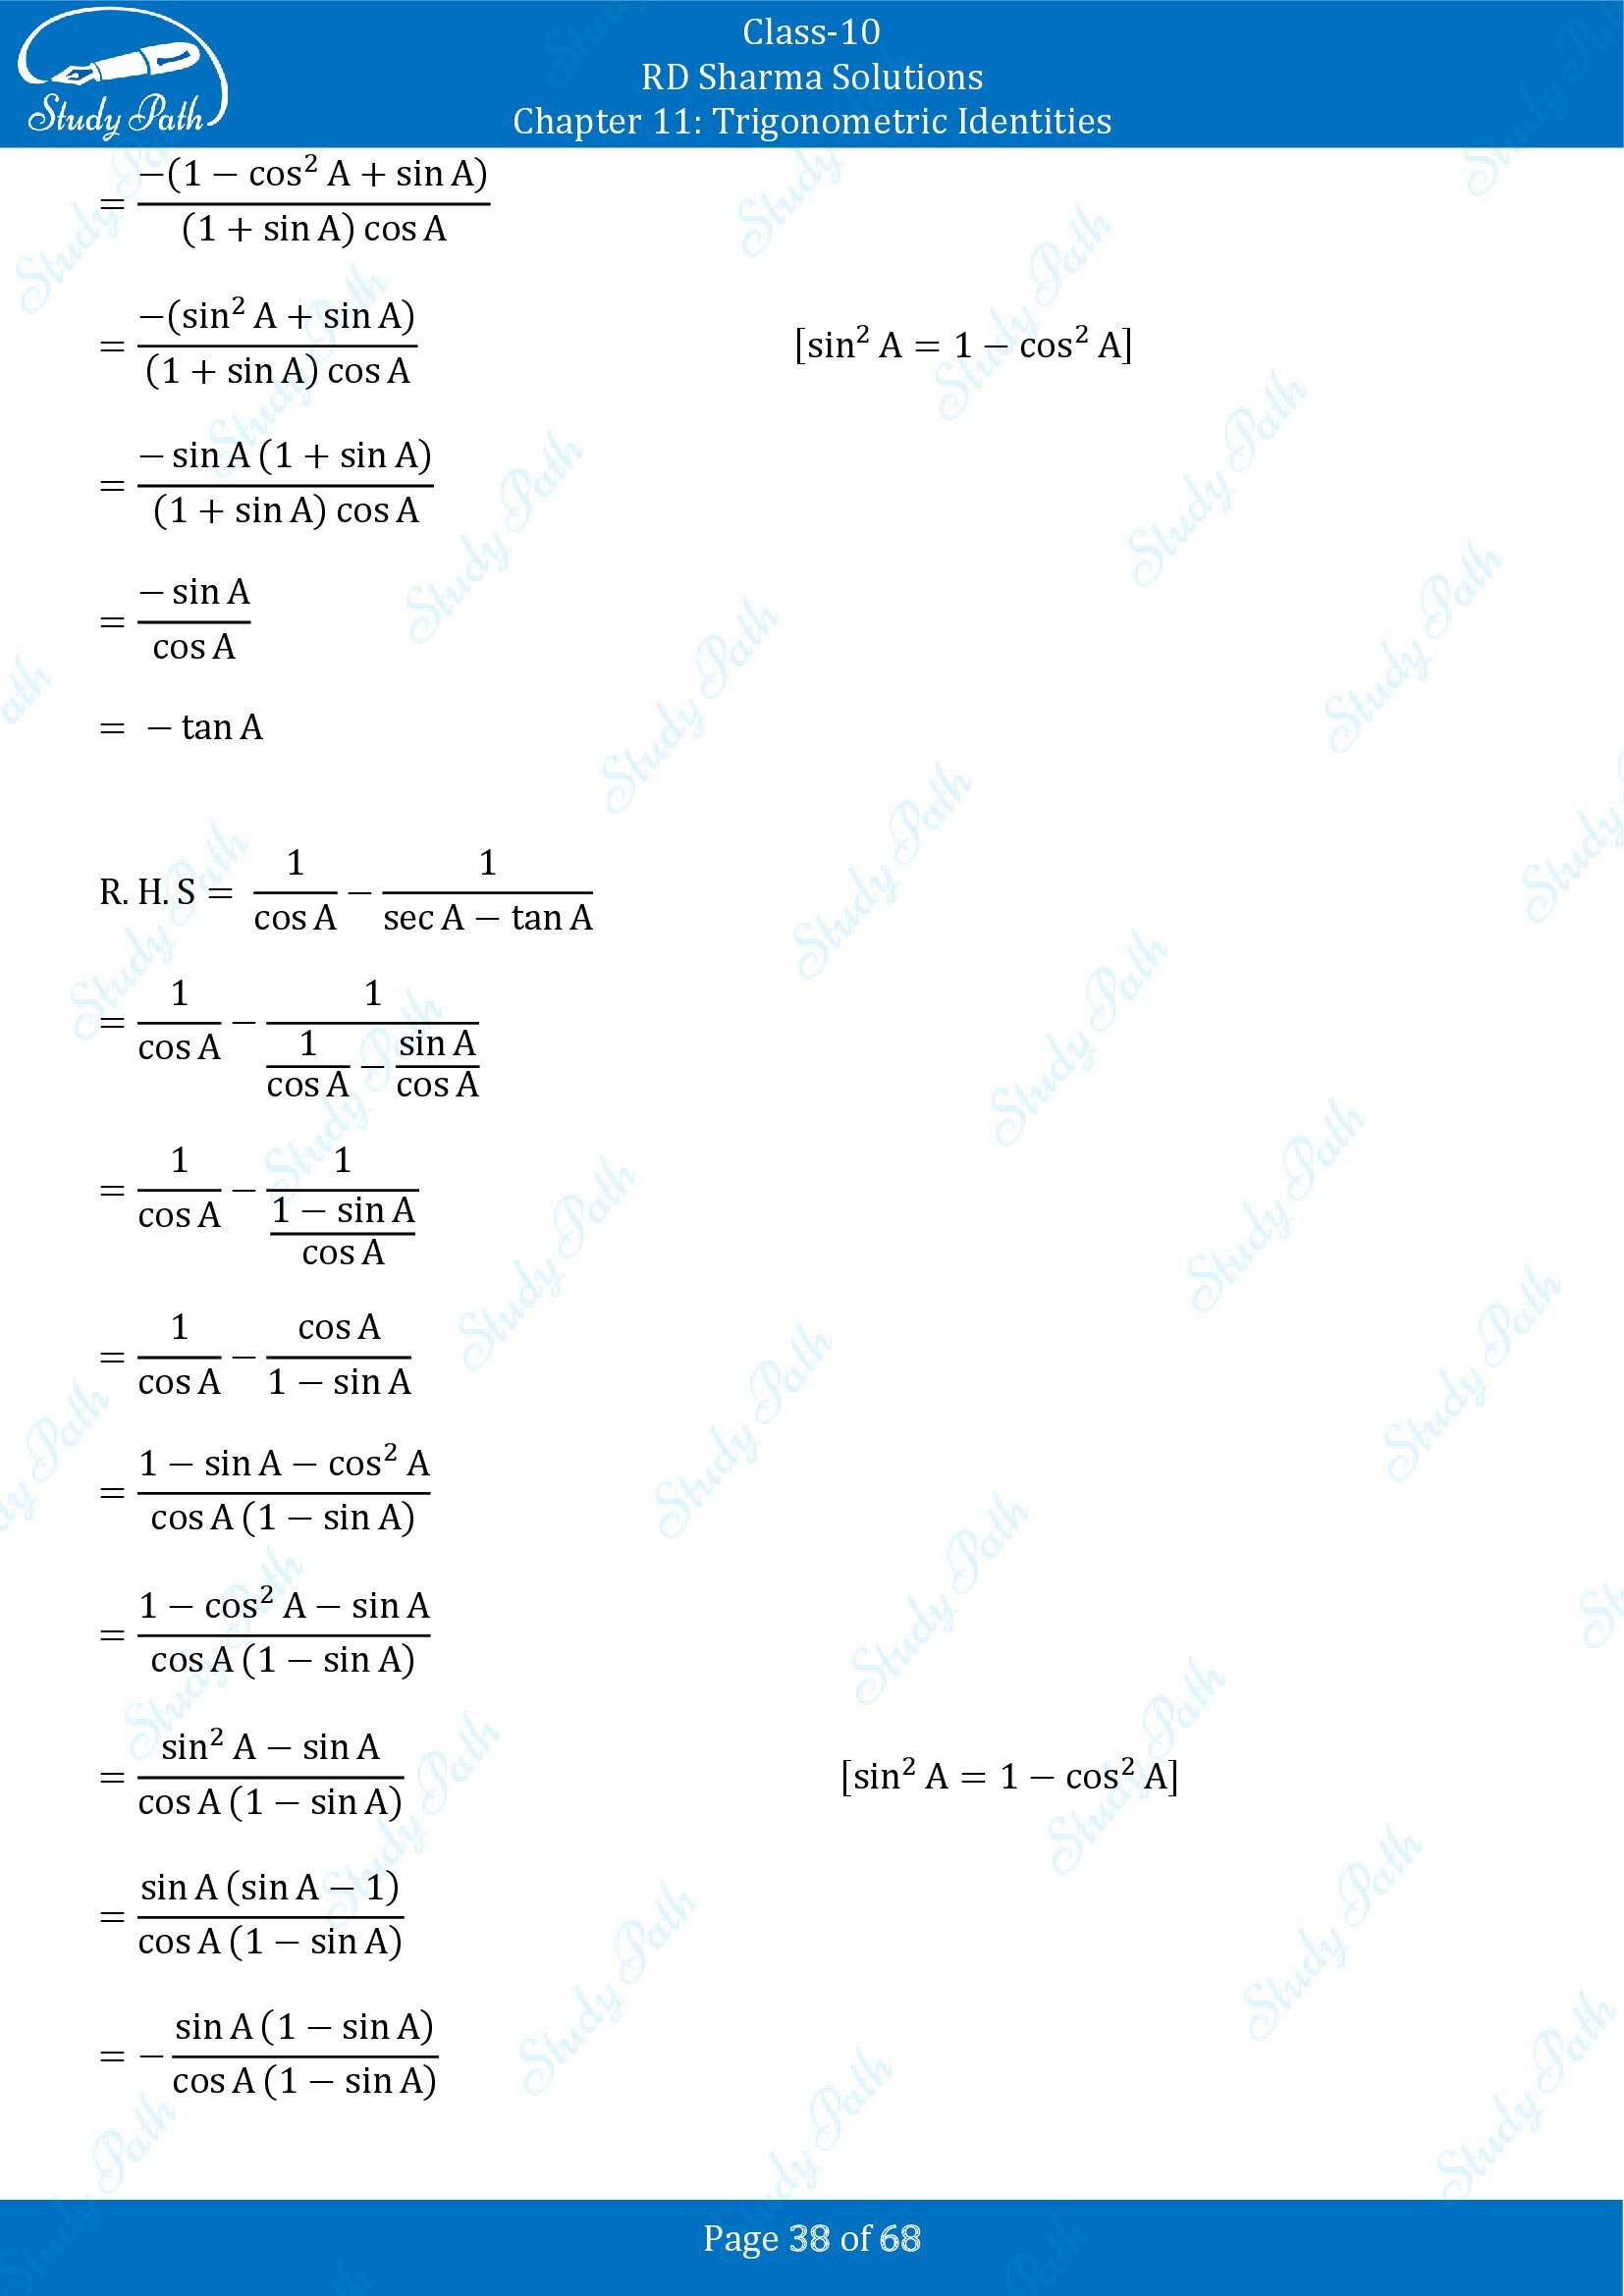 RD Sharma Solutions Class 10 Chapter 11 Trigonometric Identities Exercise 11.1 00038